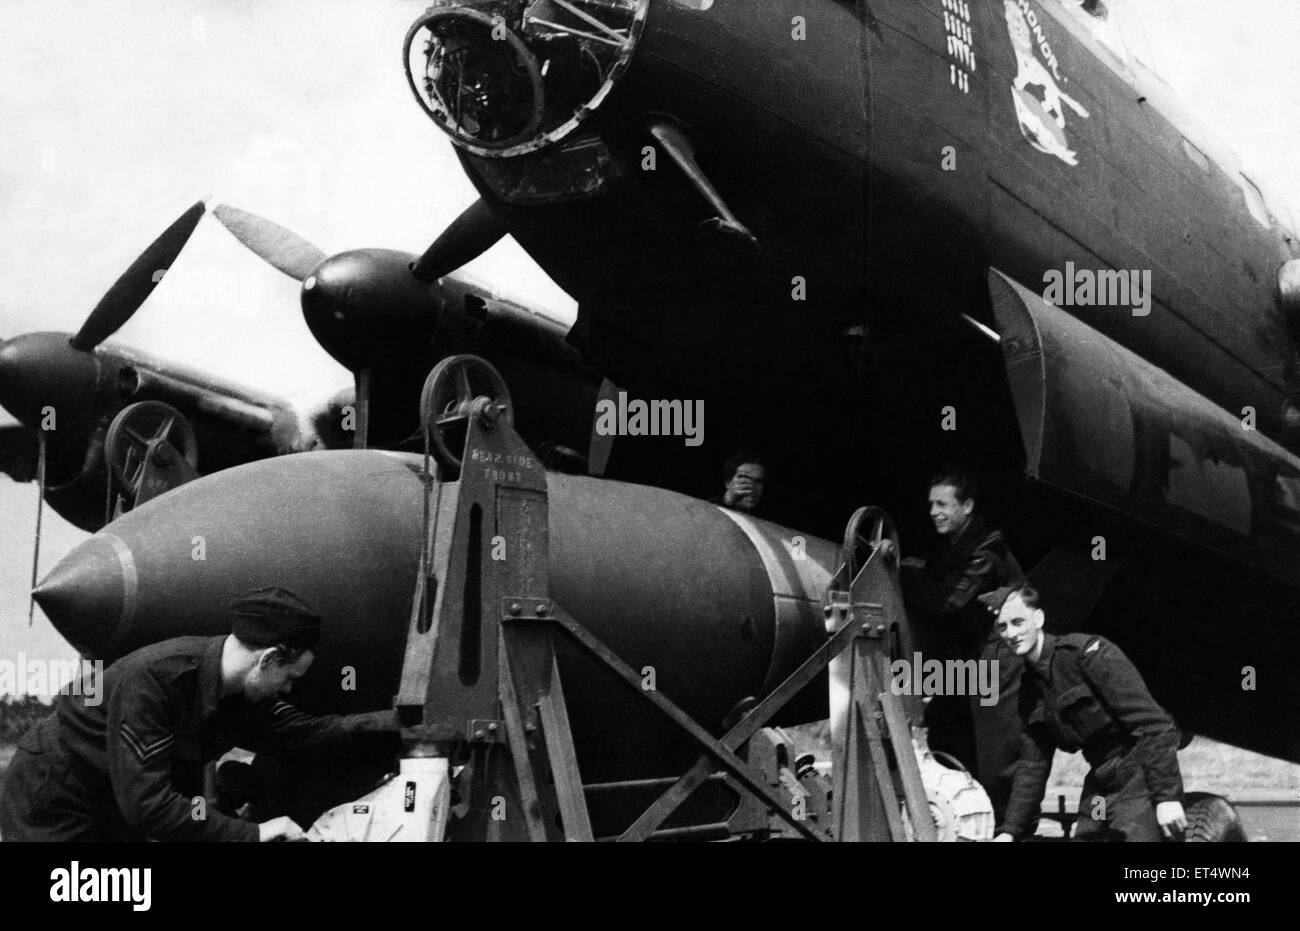 Bomber command load one of the new 12,000 pound 'earthquake' bombs onto  a Lancaster II bomber, the same bombs that sunk the 45,000 ton German battleship Tirpitz in Norway. 14th October 1944. Stock Photo